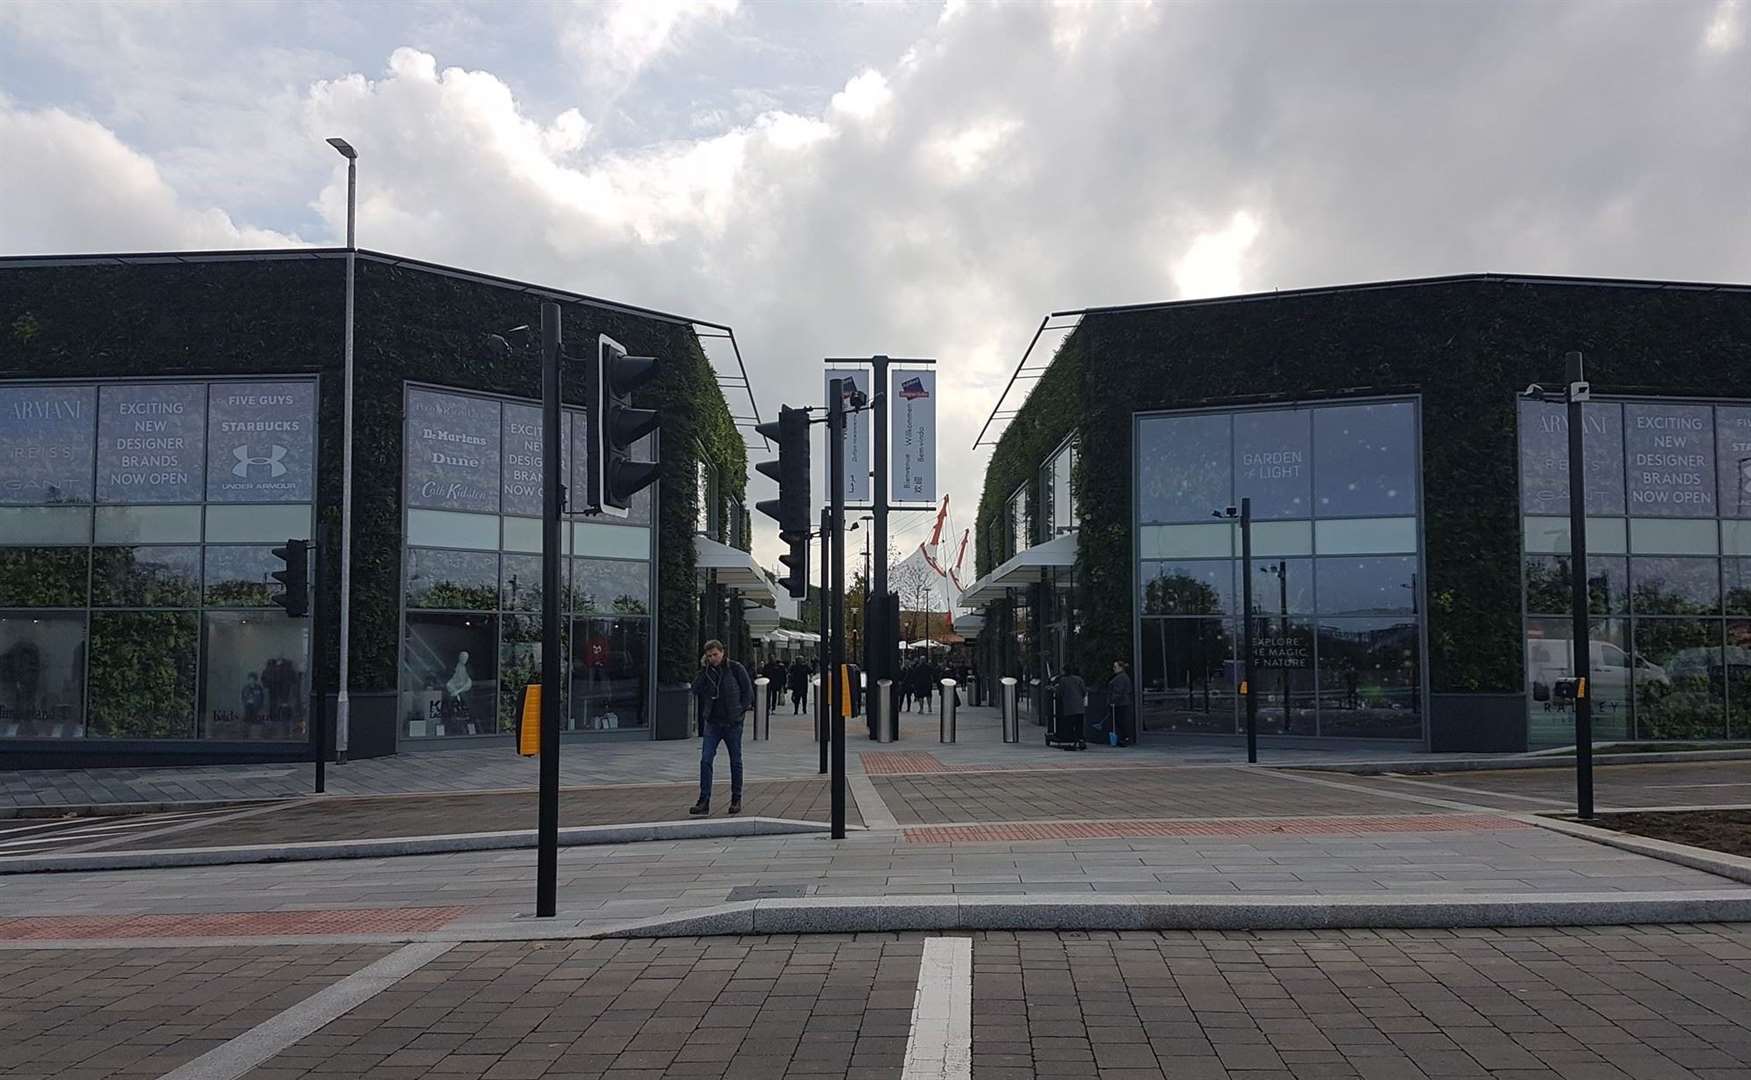 The completed outlet along Newtown Road in Ashford